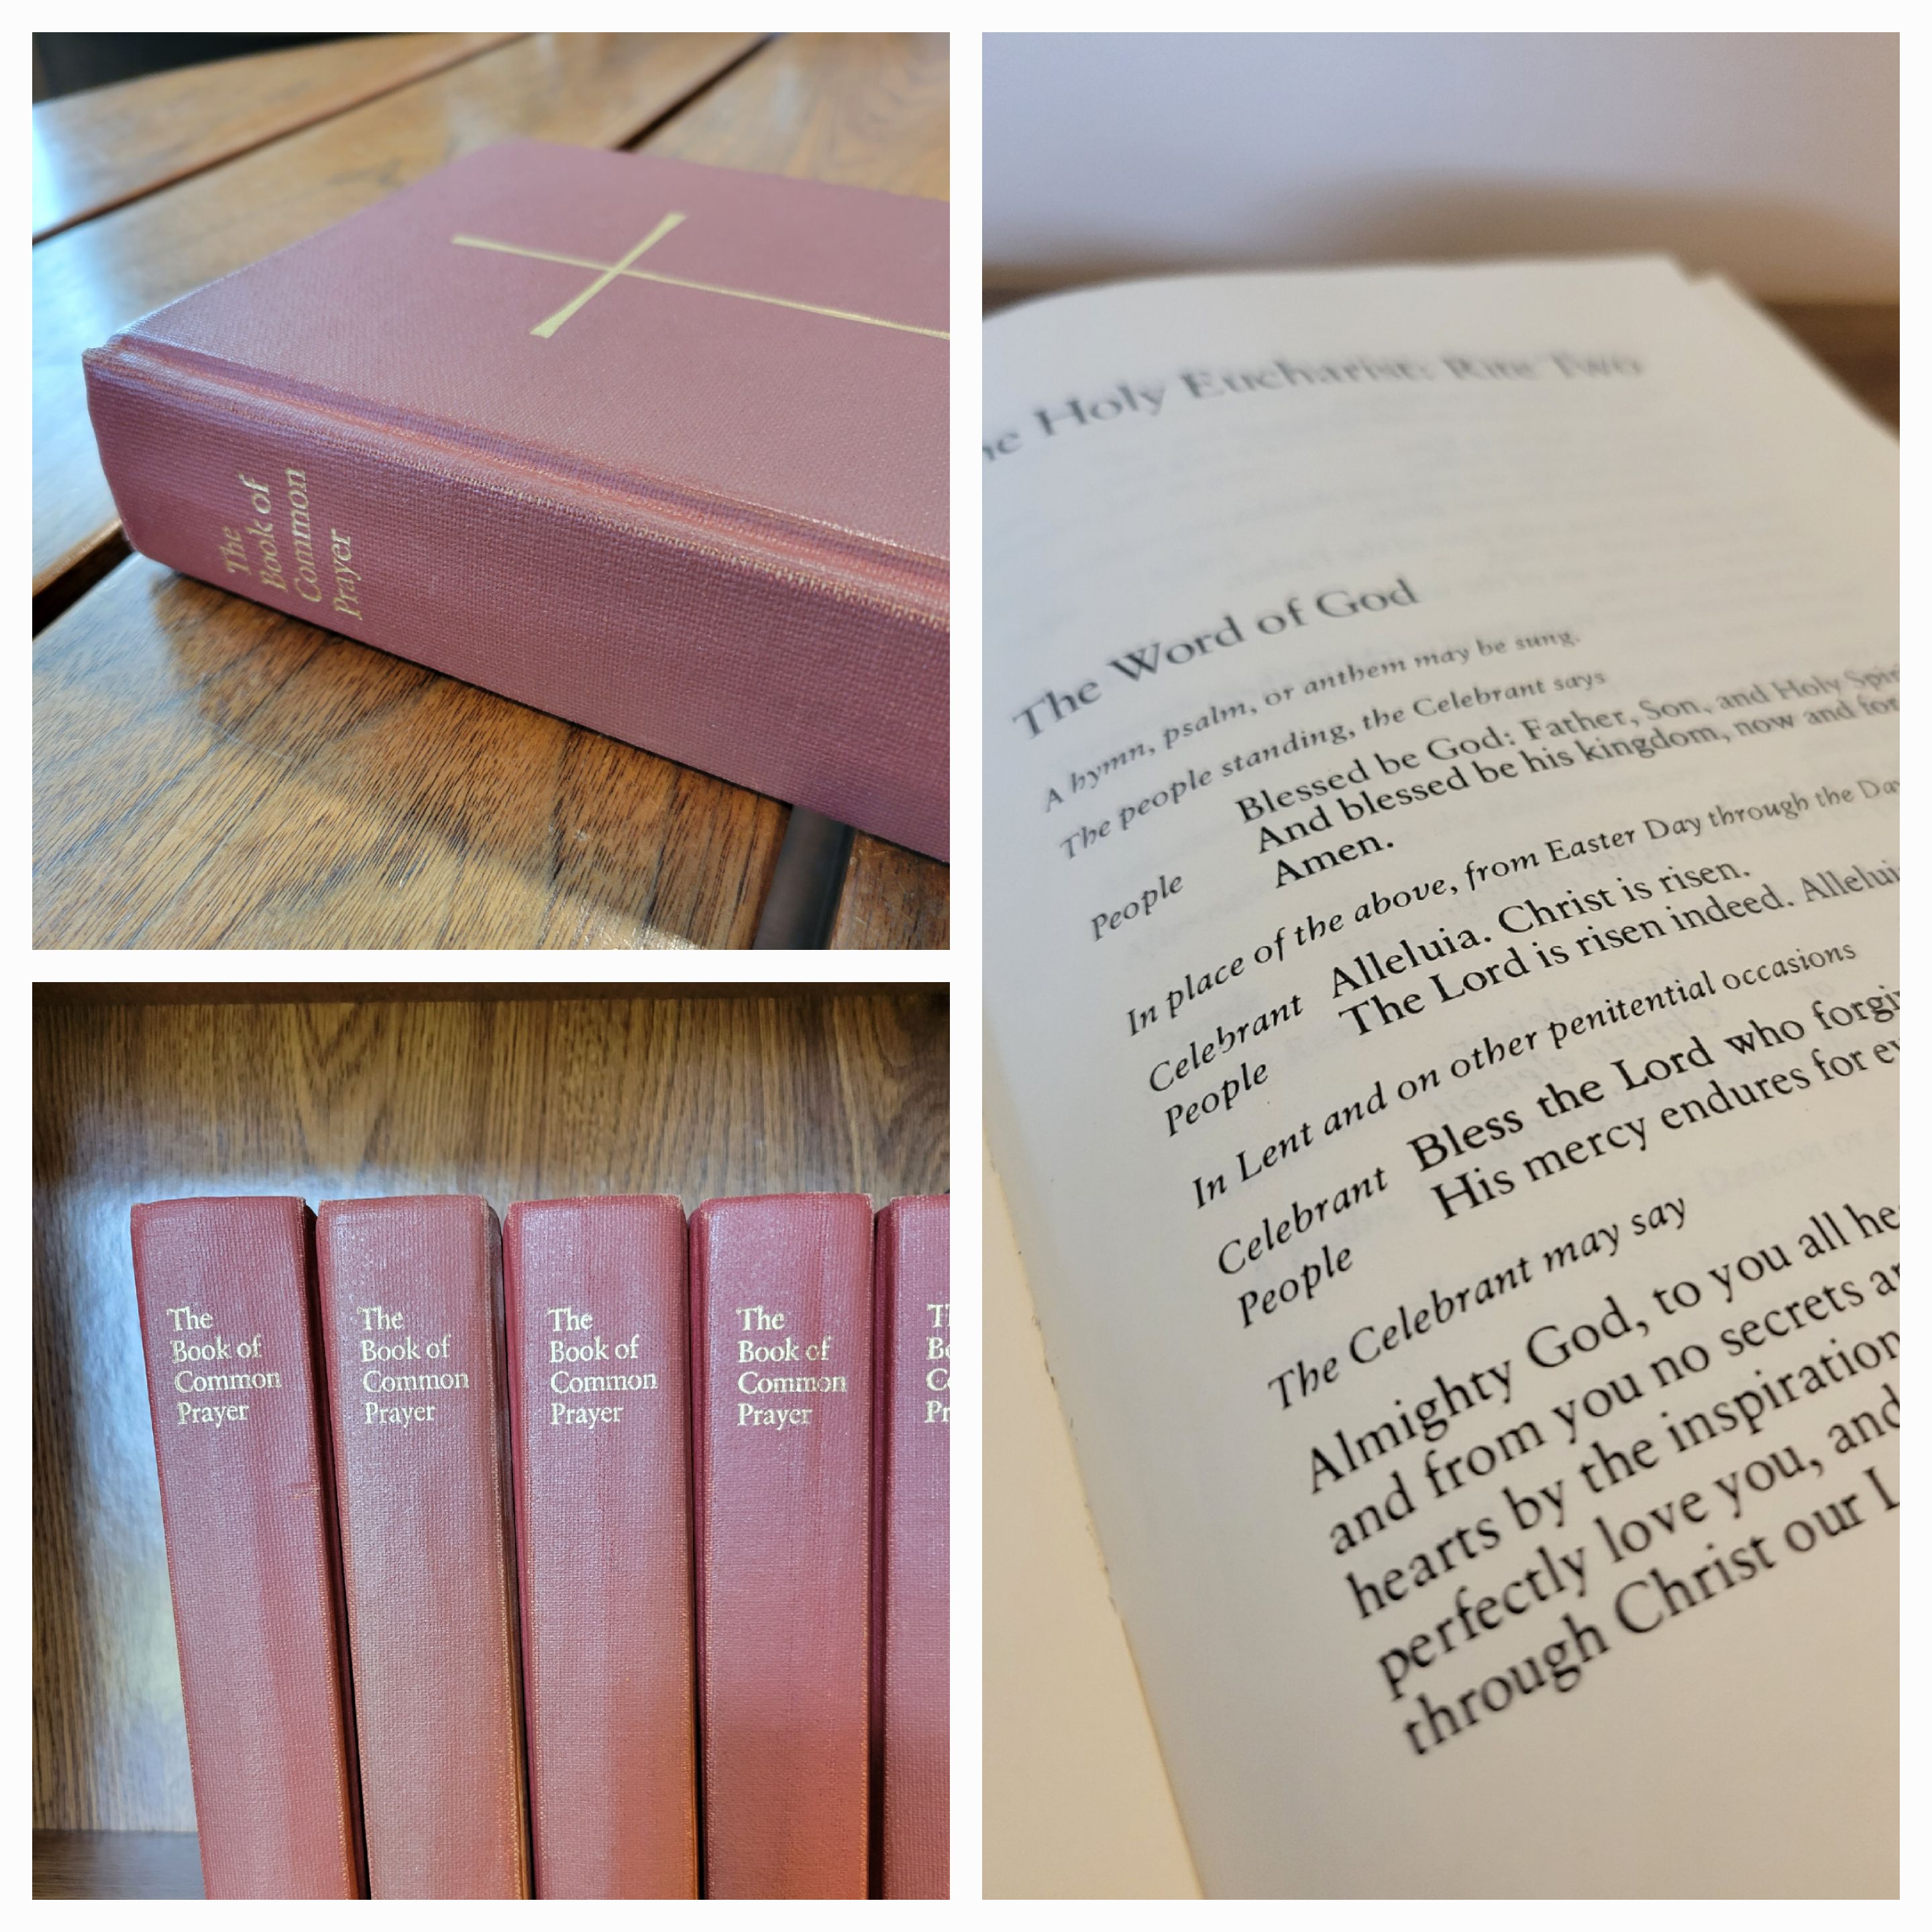 pictures of Book of Common Prayer on shelf and open